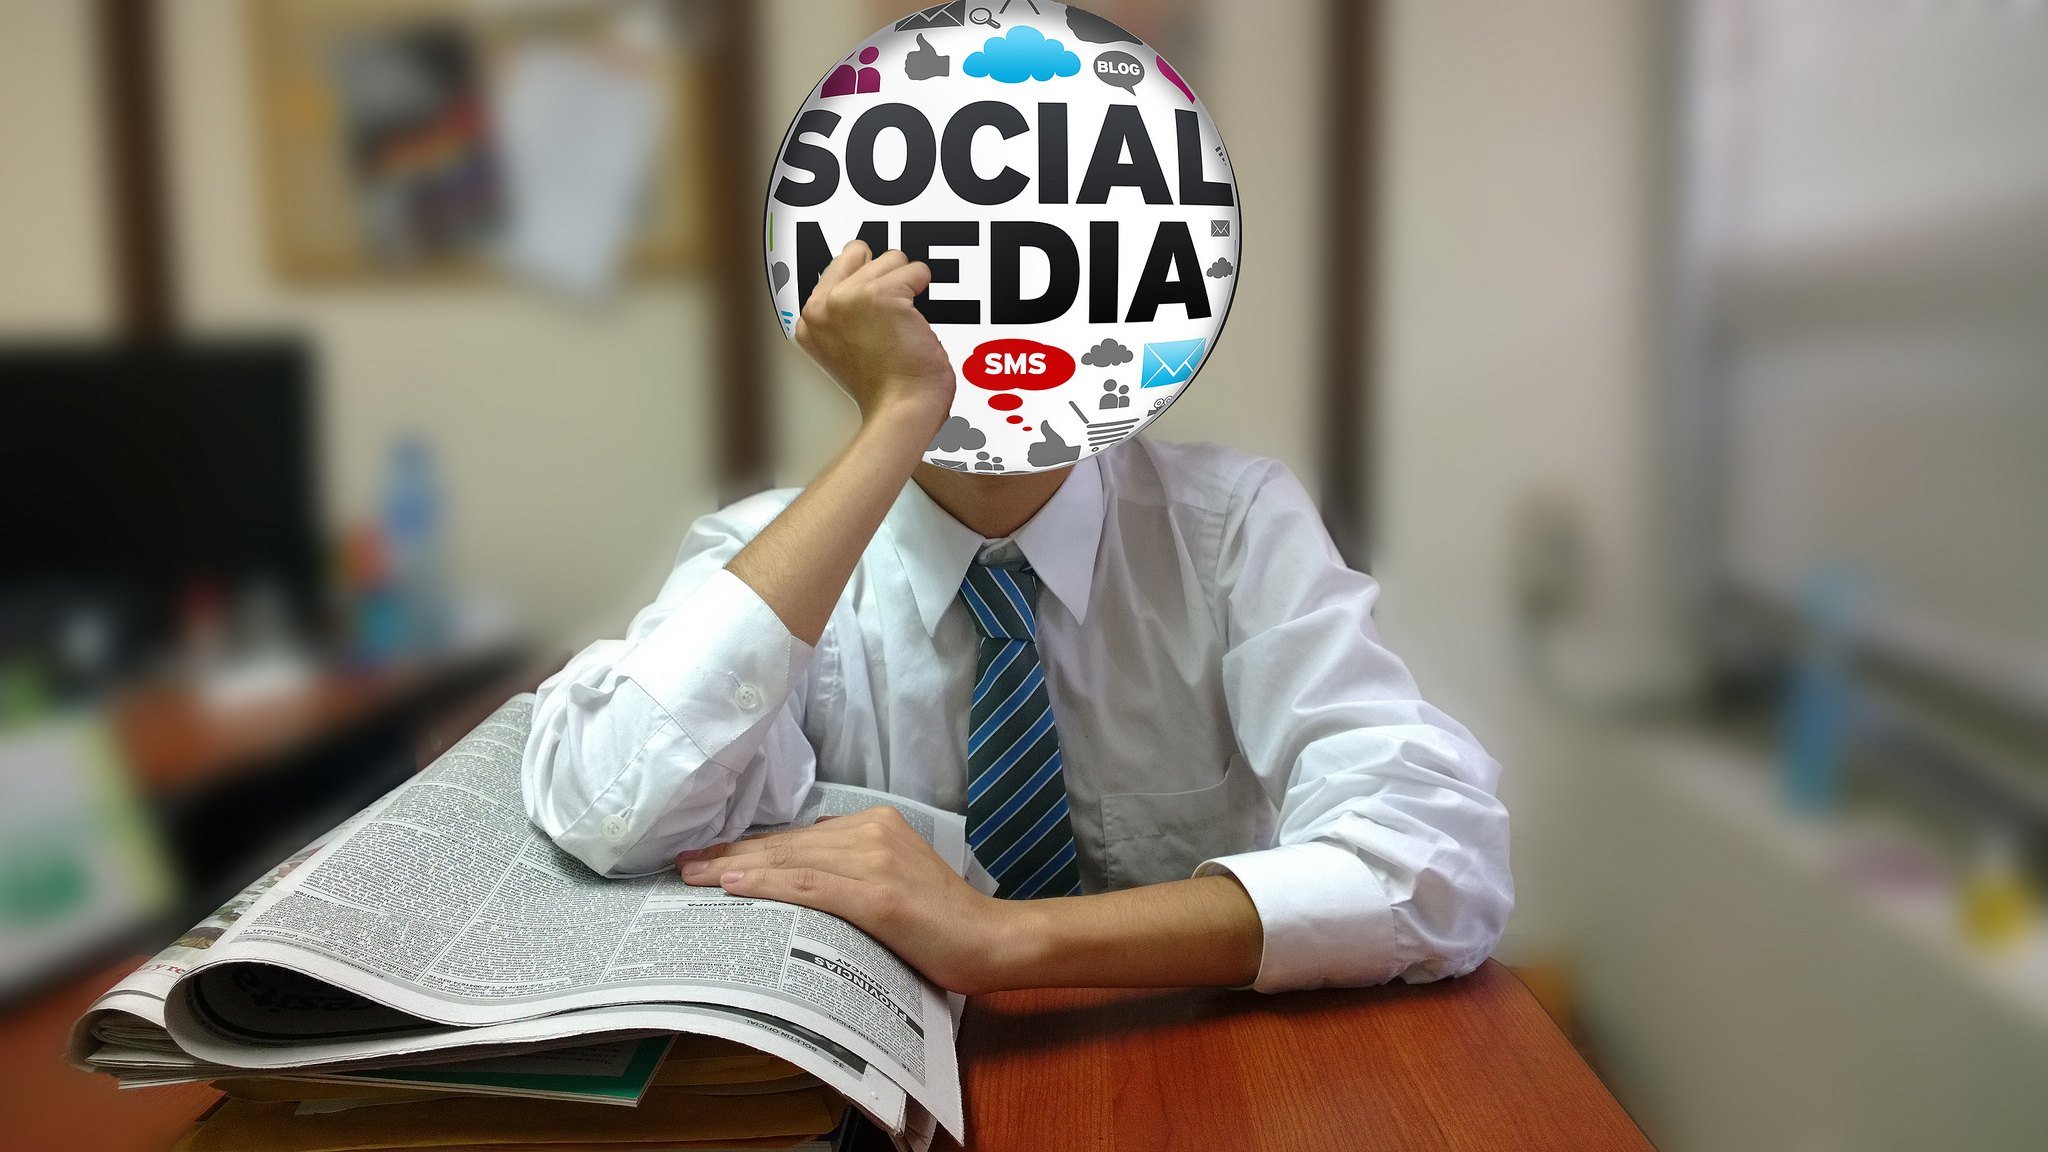 5 Habits You Need To Practice If You Feel Tired Of Social Media